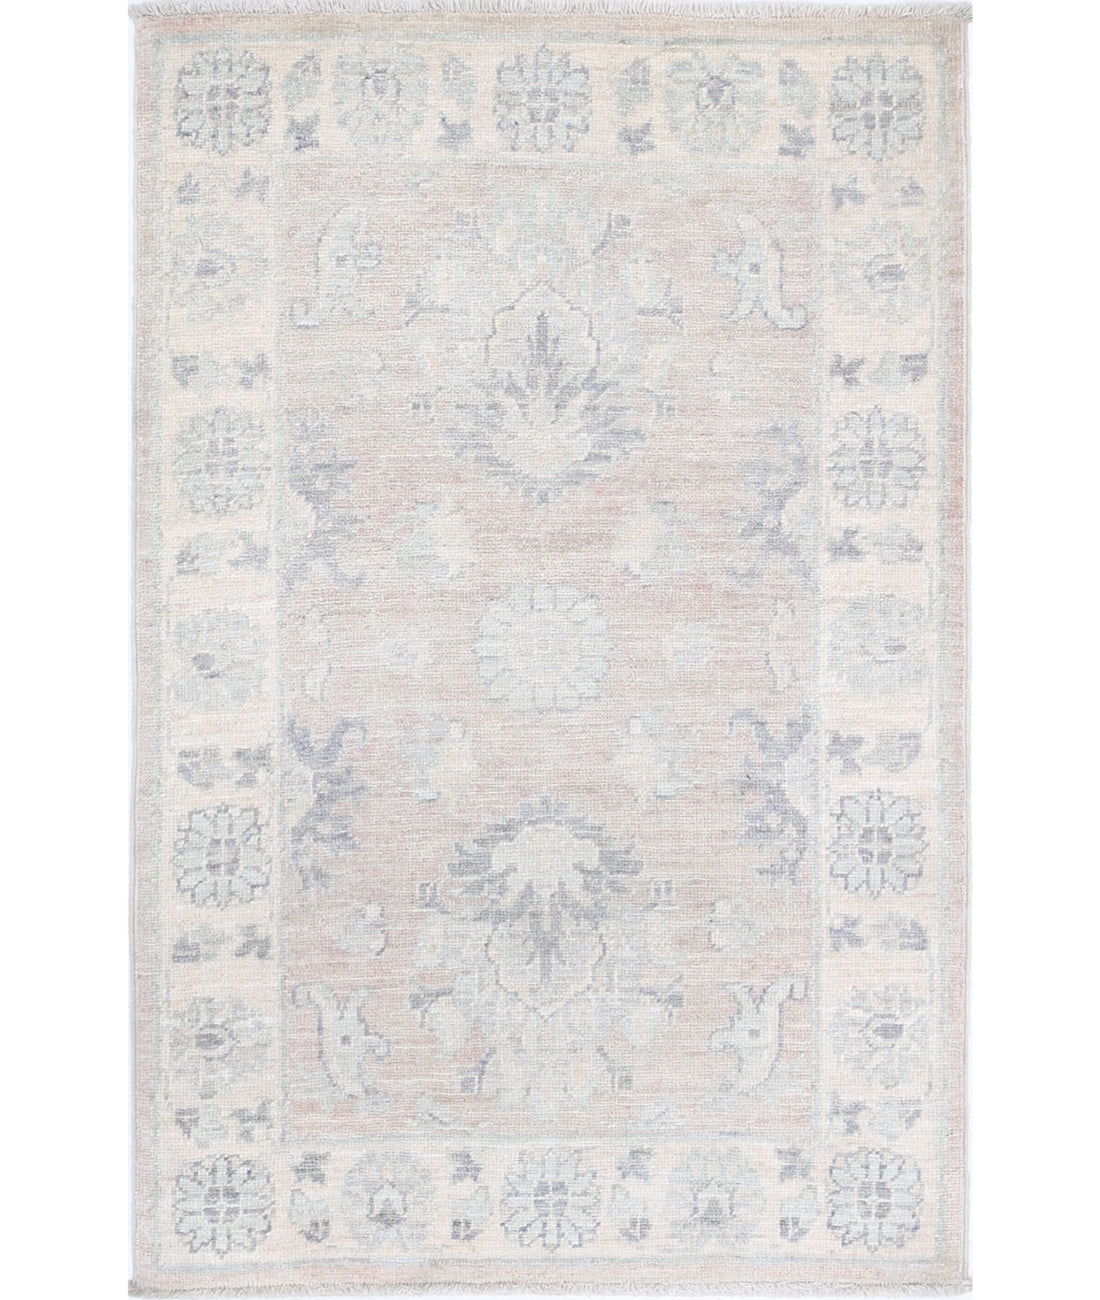 Hand Knotted Serenity Wool Rug - 2'2'' x 3'1'' 2'2'' x 3'1'' (65 X 93) / Brown / Ivory